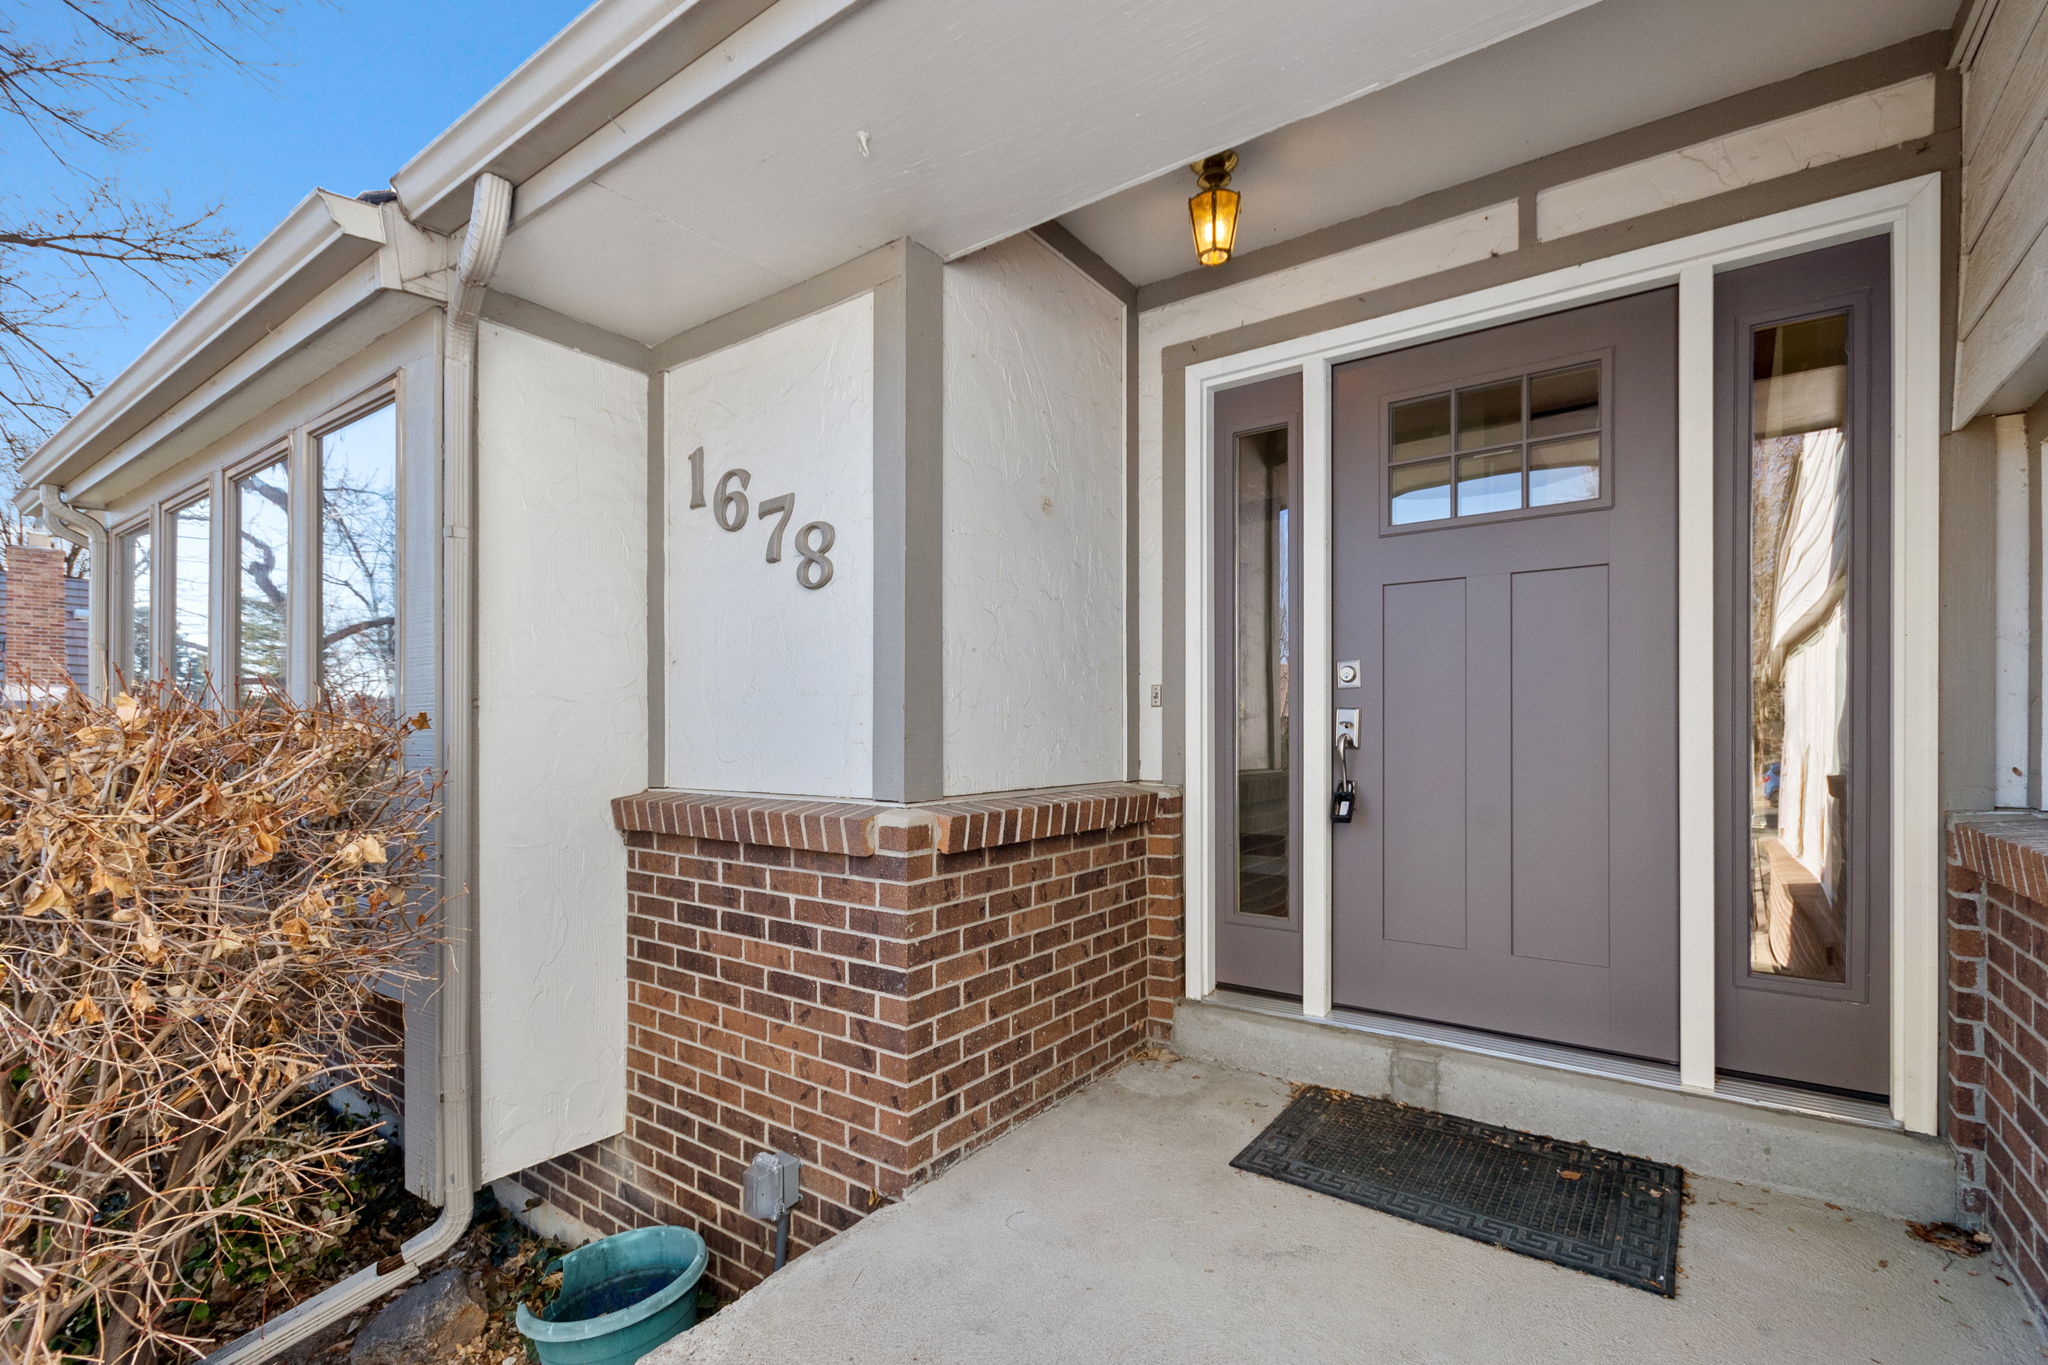  1678 W 115th Cir, Westminster, CO 80234, US Photo 4